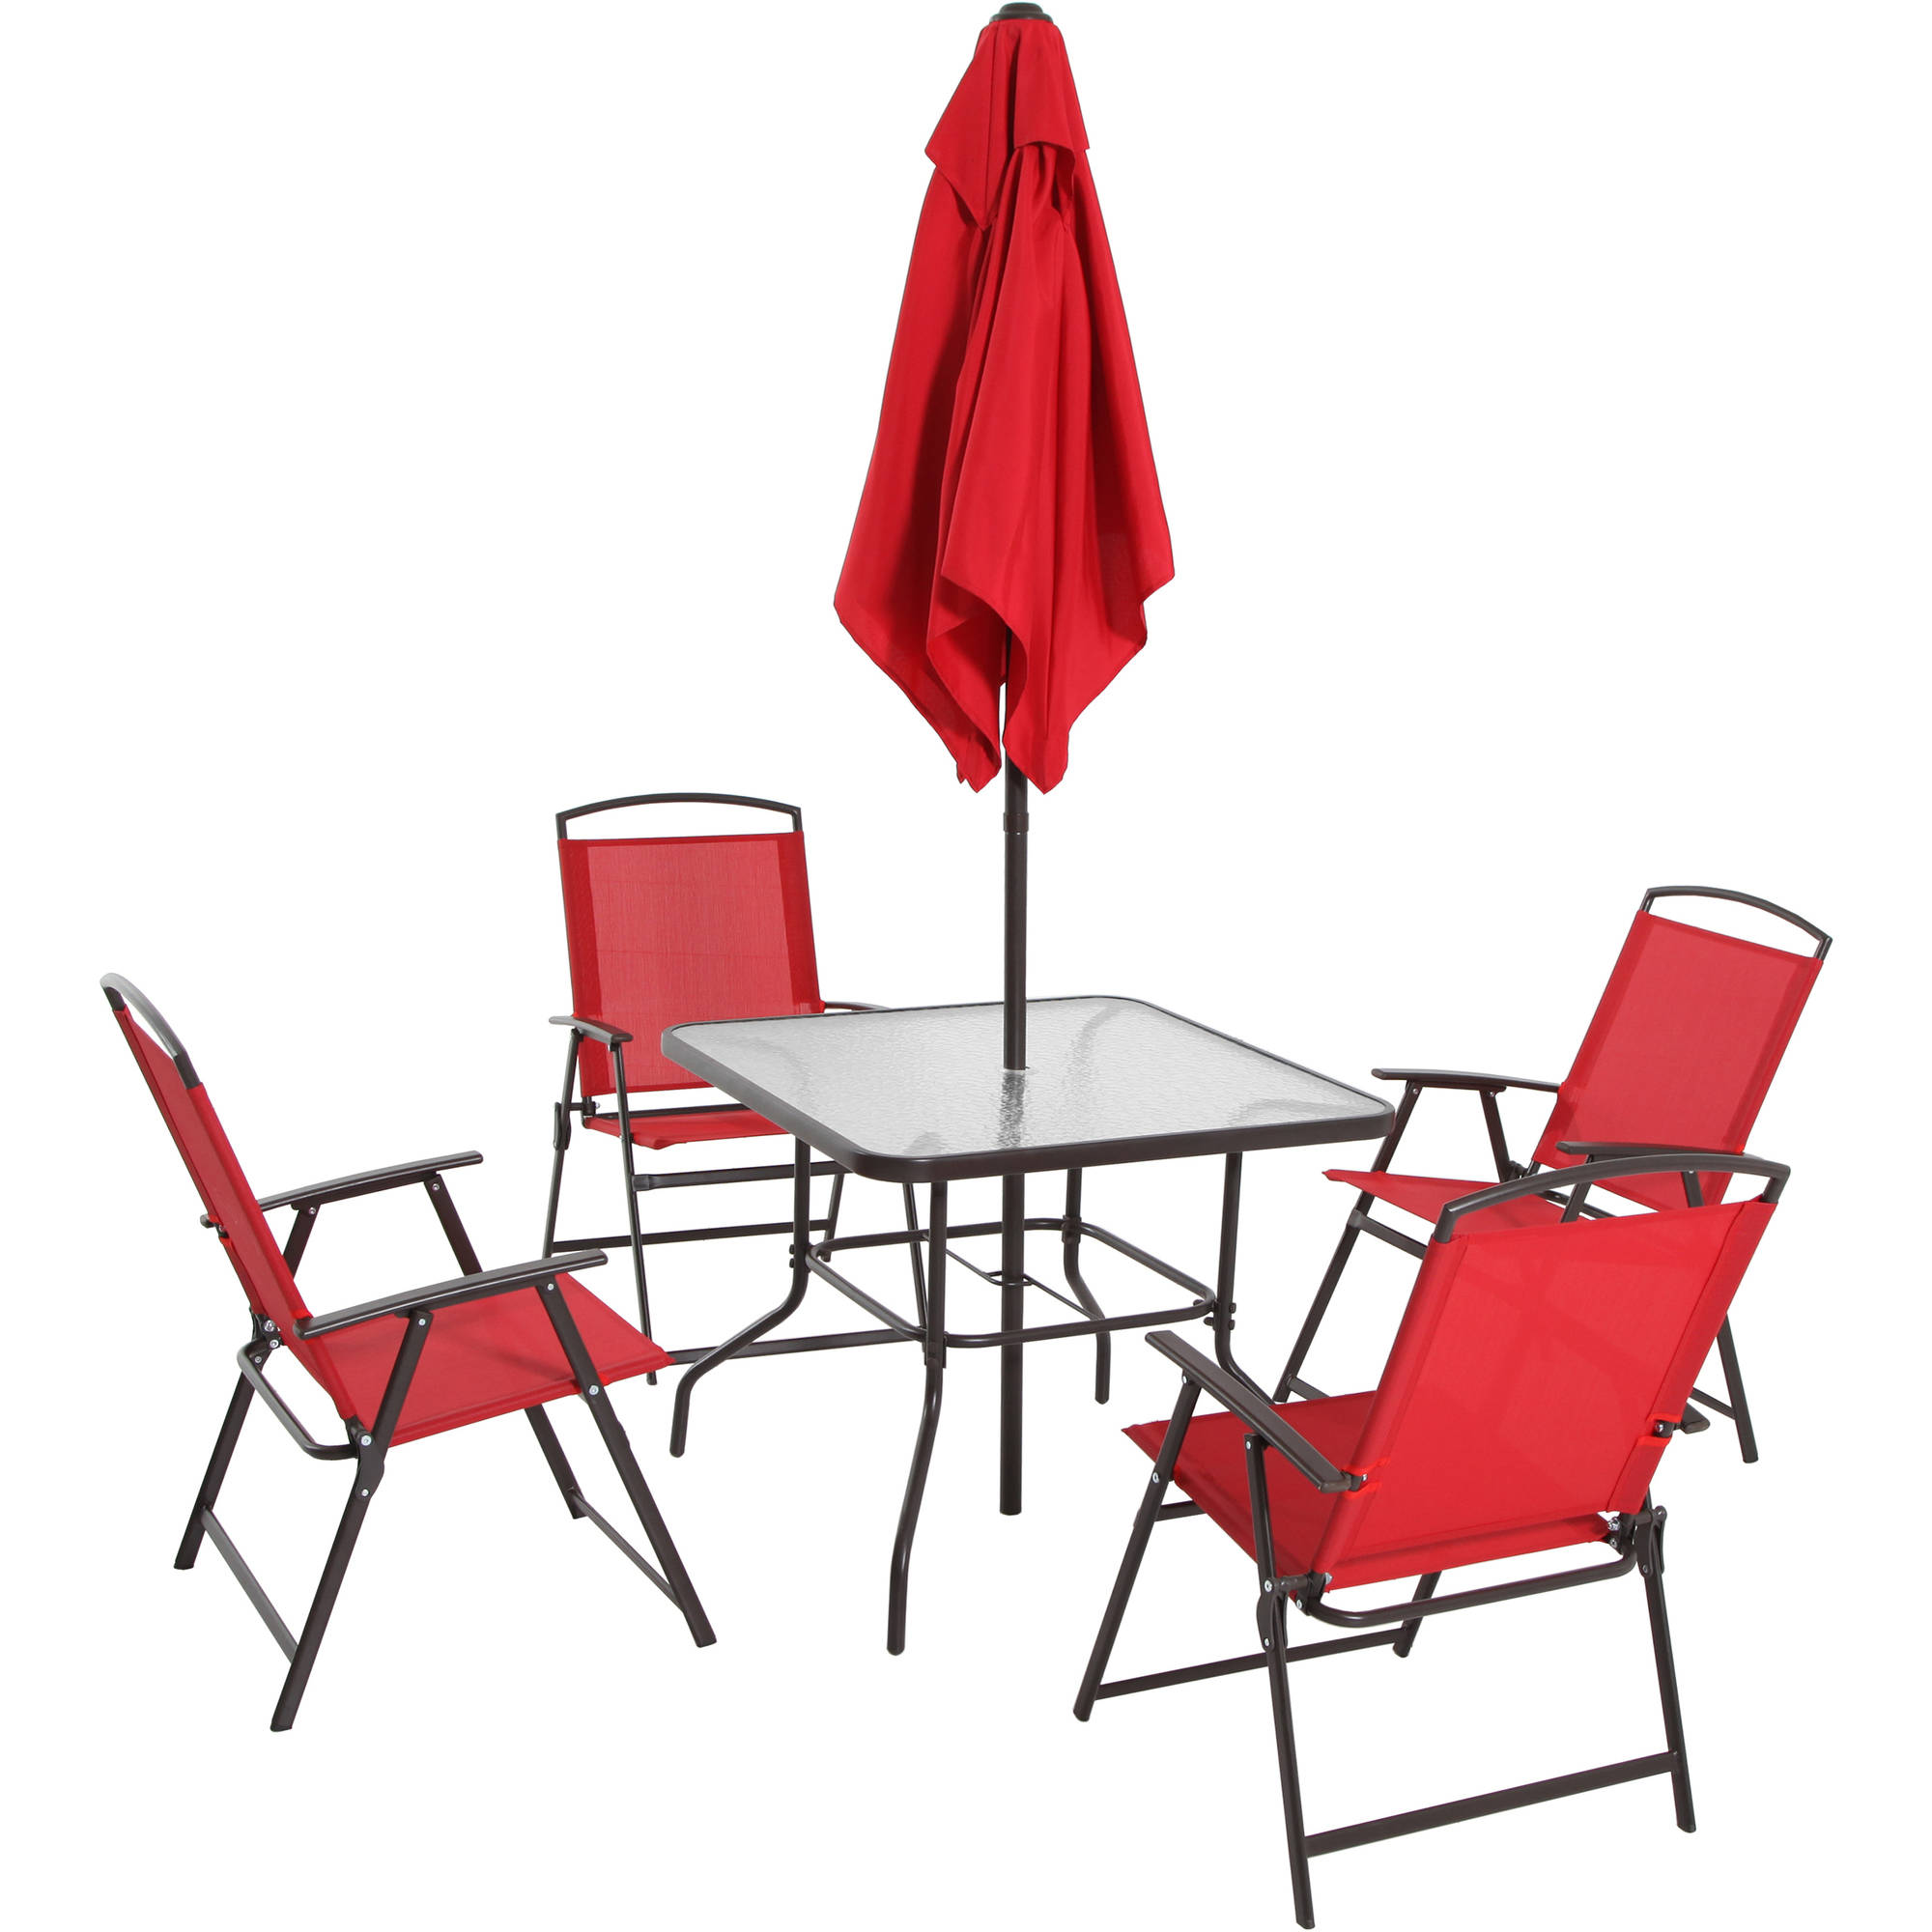 Mainstays Albany Lane Steel Outdoor Patio Dining Set of 6, Red - image 3 of 12